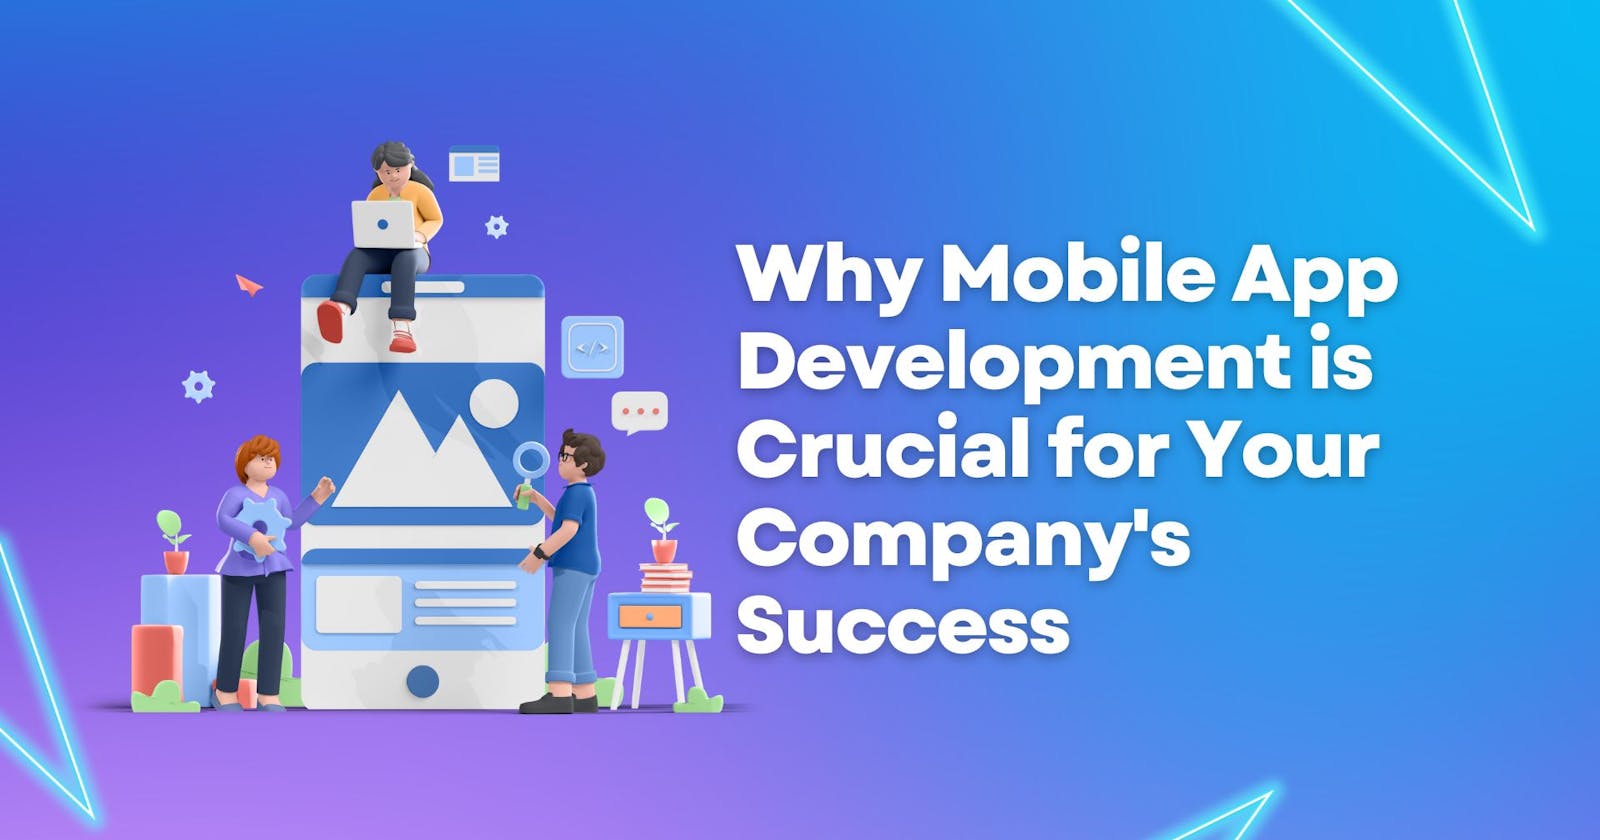 Why Mobile App Development is Crucial for Your Company's Success